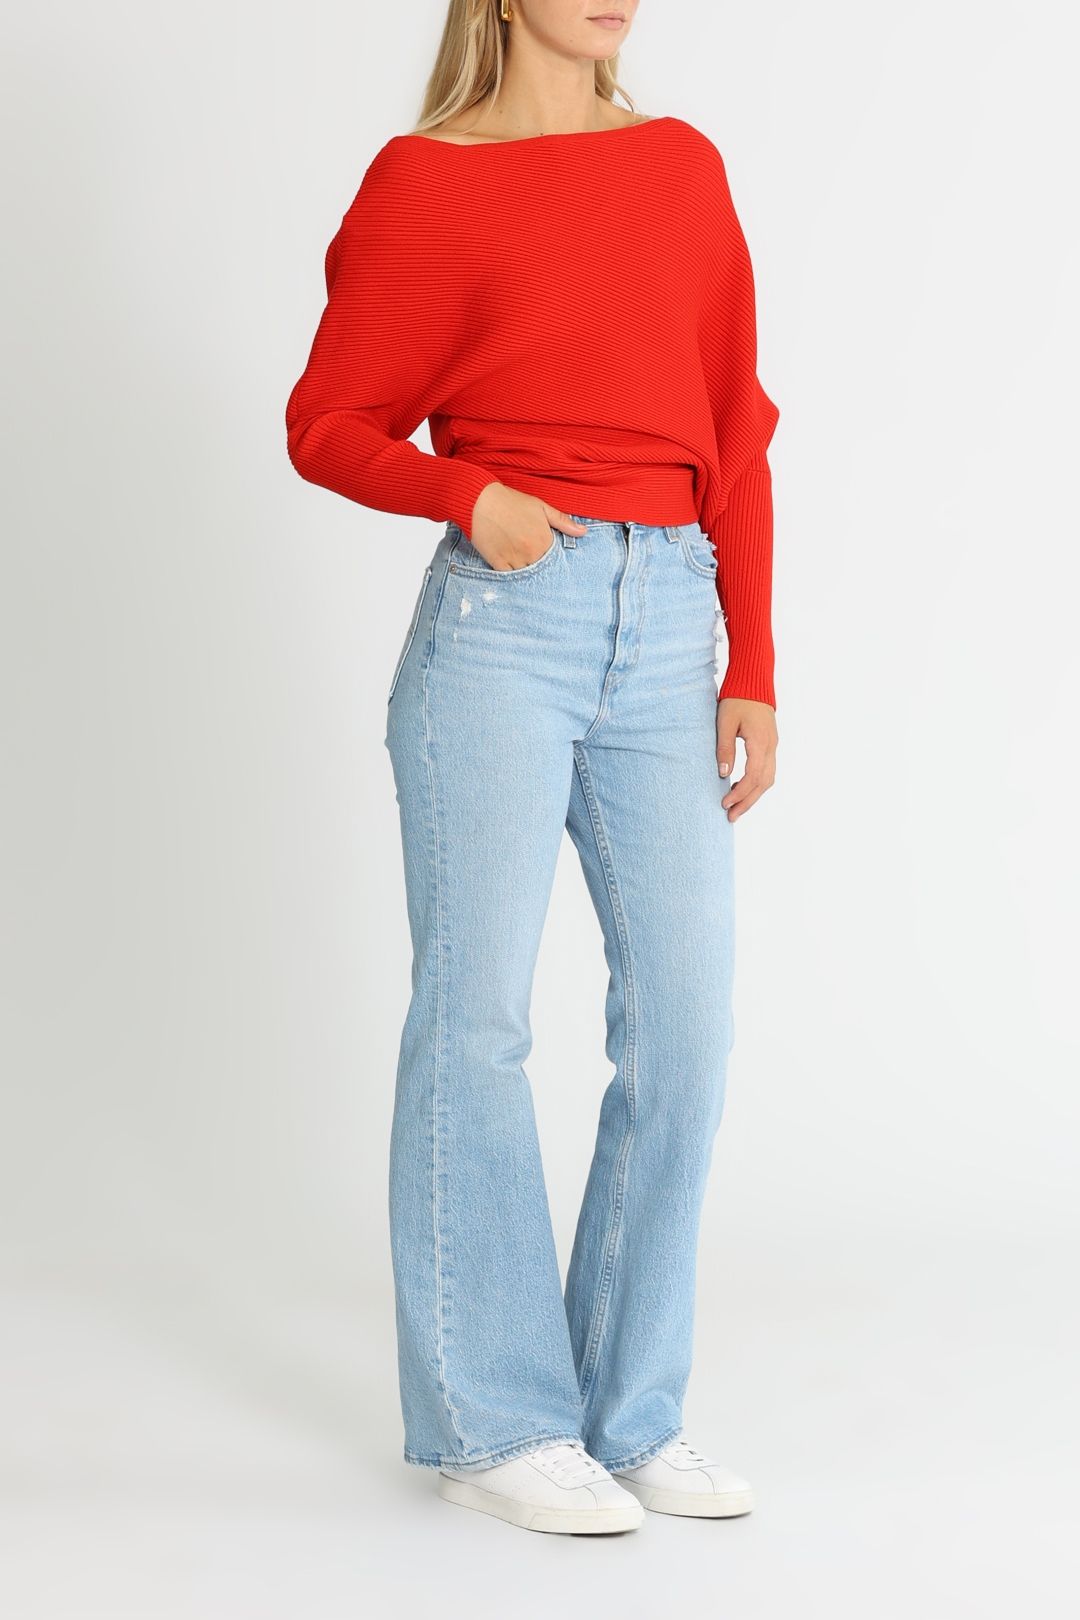 Reiss Lorna Asym Knitted Top Red